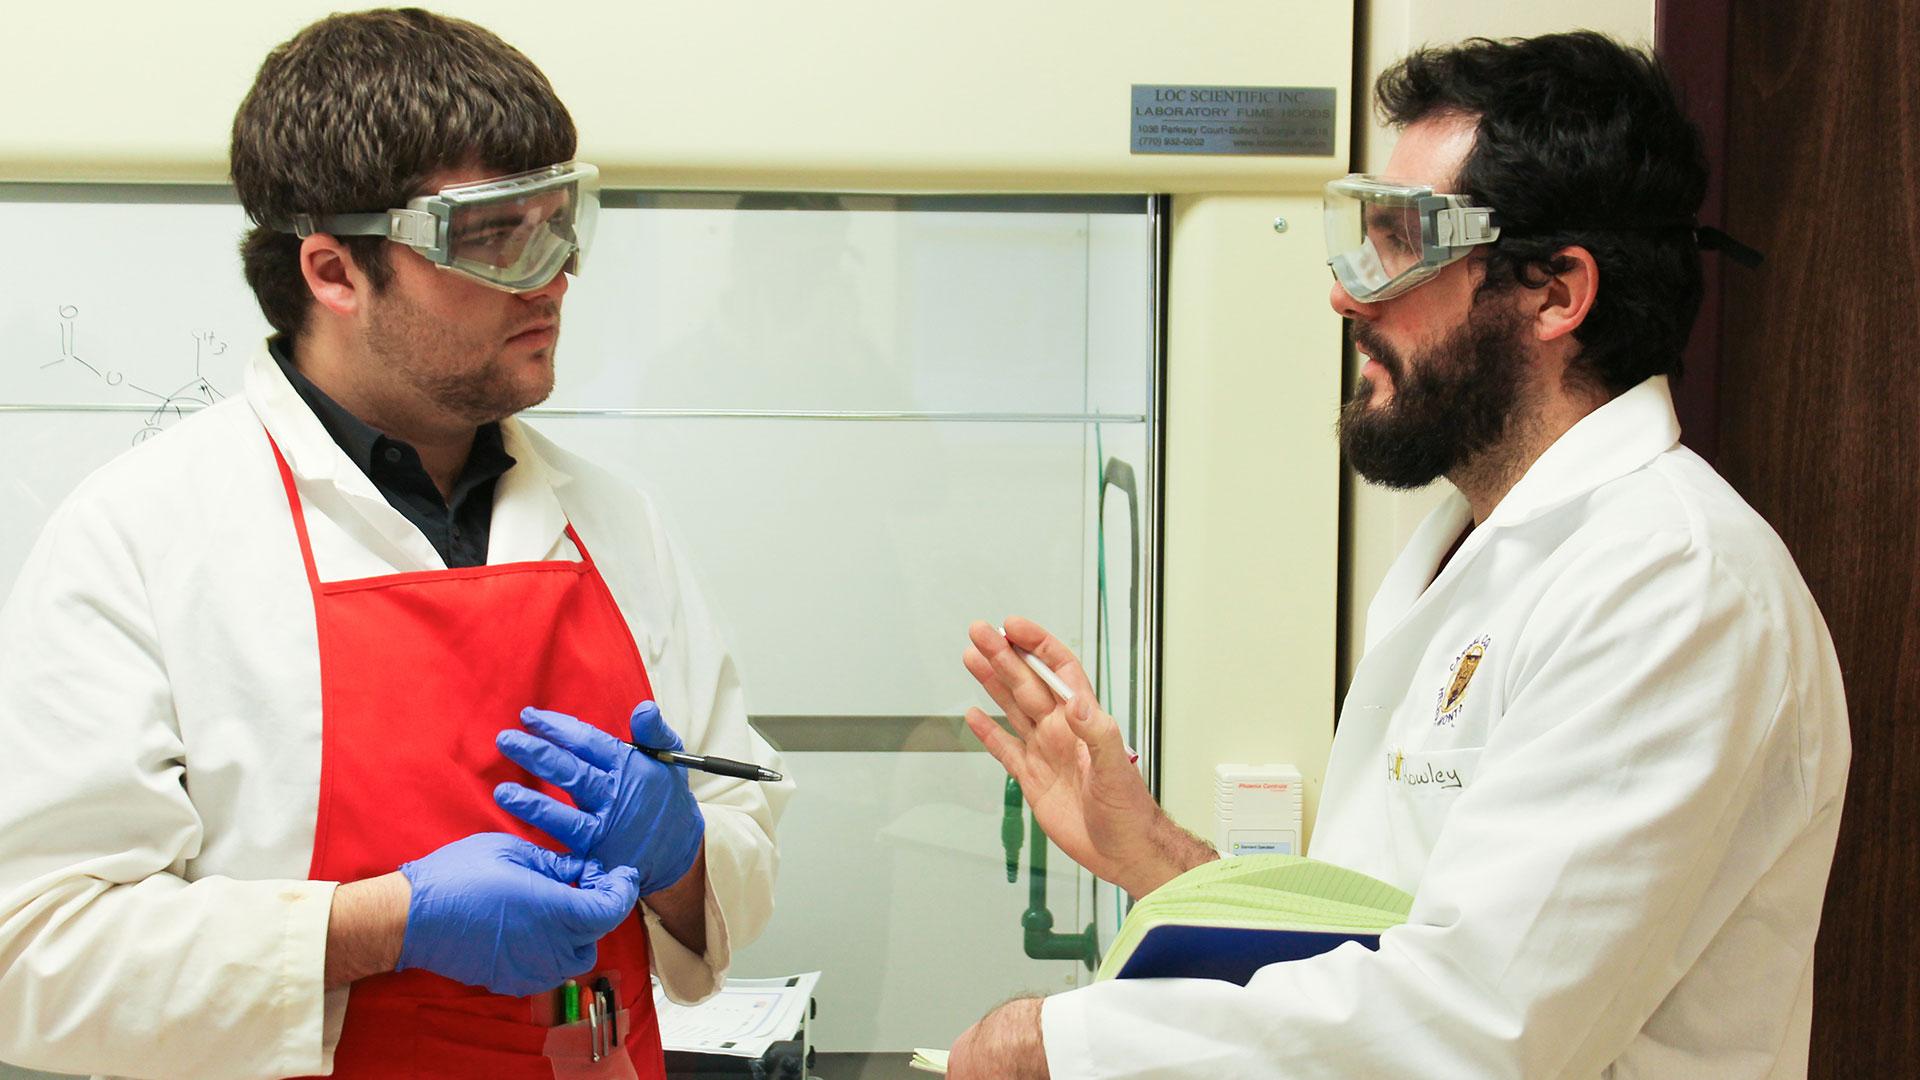 Dr. Rowley works with a student in the E.L.Wiegand Integrated Research and Learning Lab